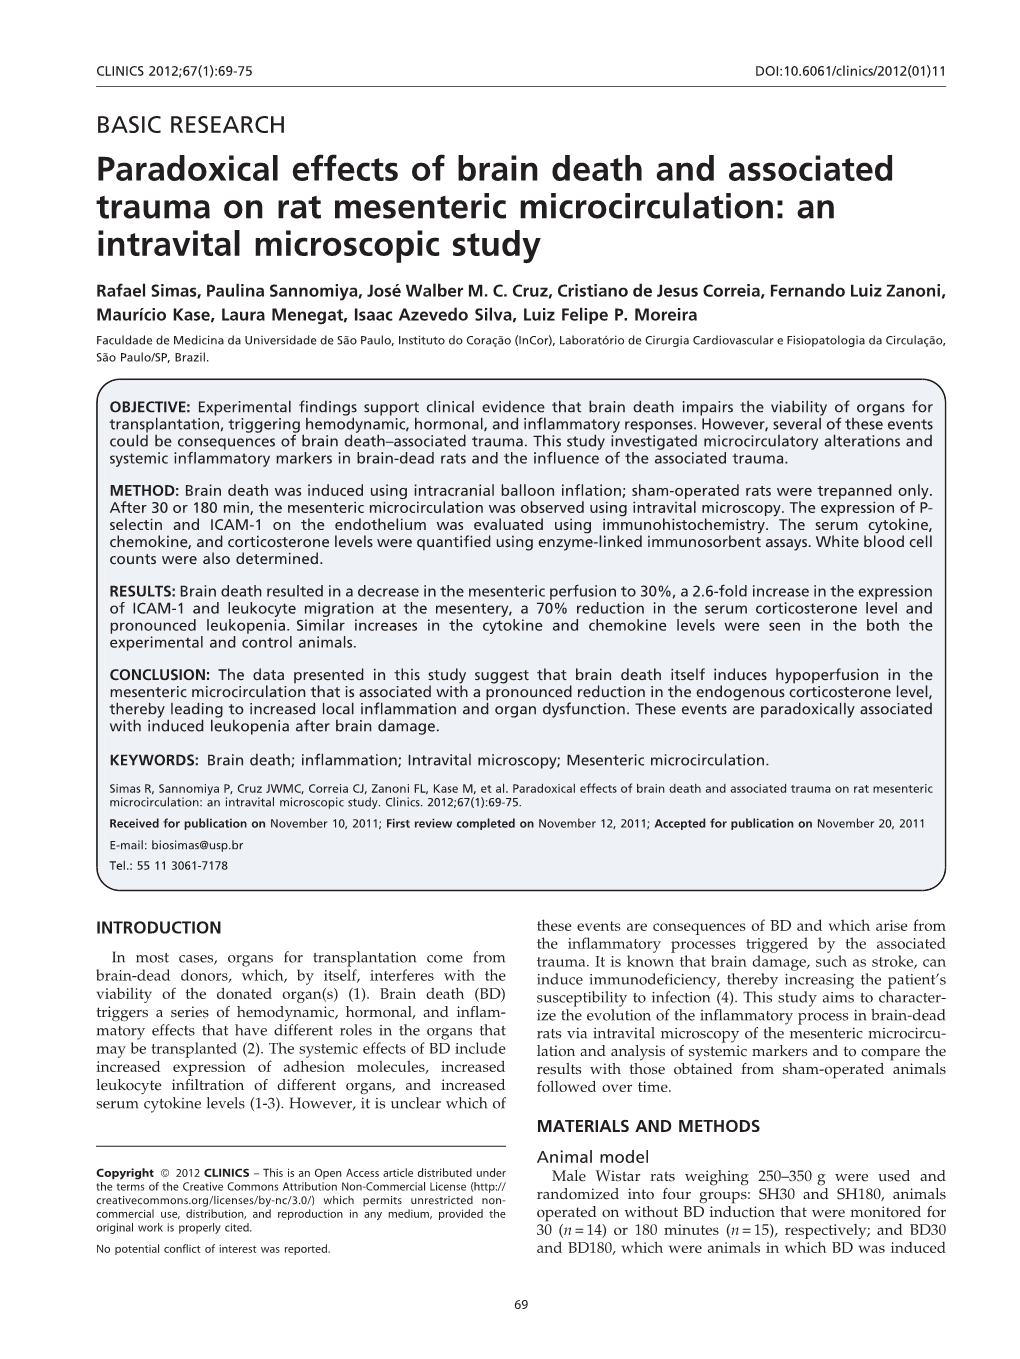 Paradoxical Effects of Brain Death and Associated Trauma on Rat Mesenteric Microcirculation: an Intravital Microscopic Study